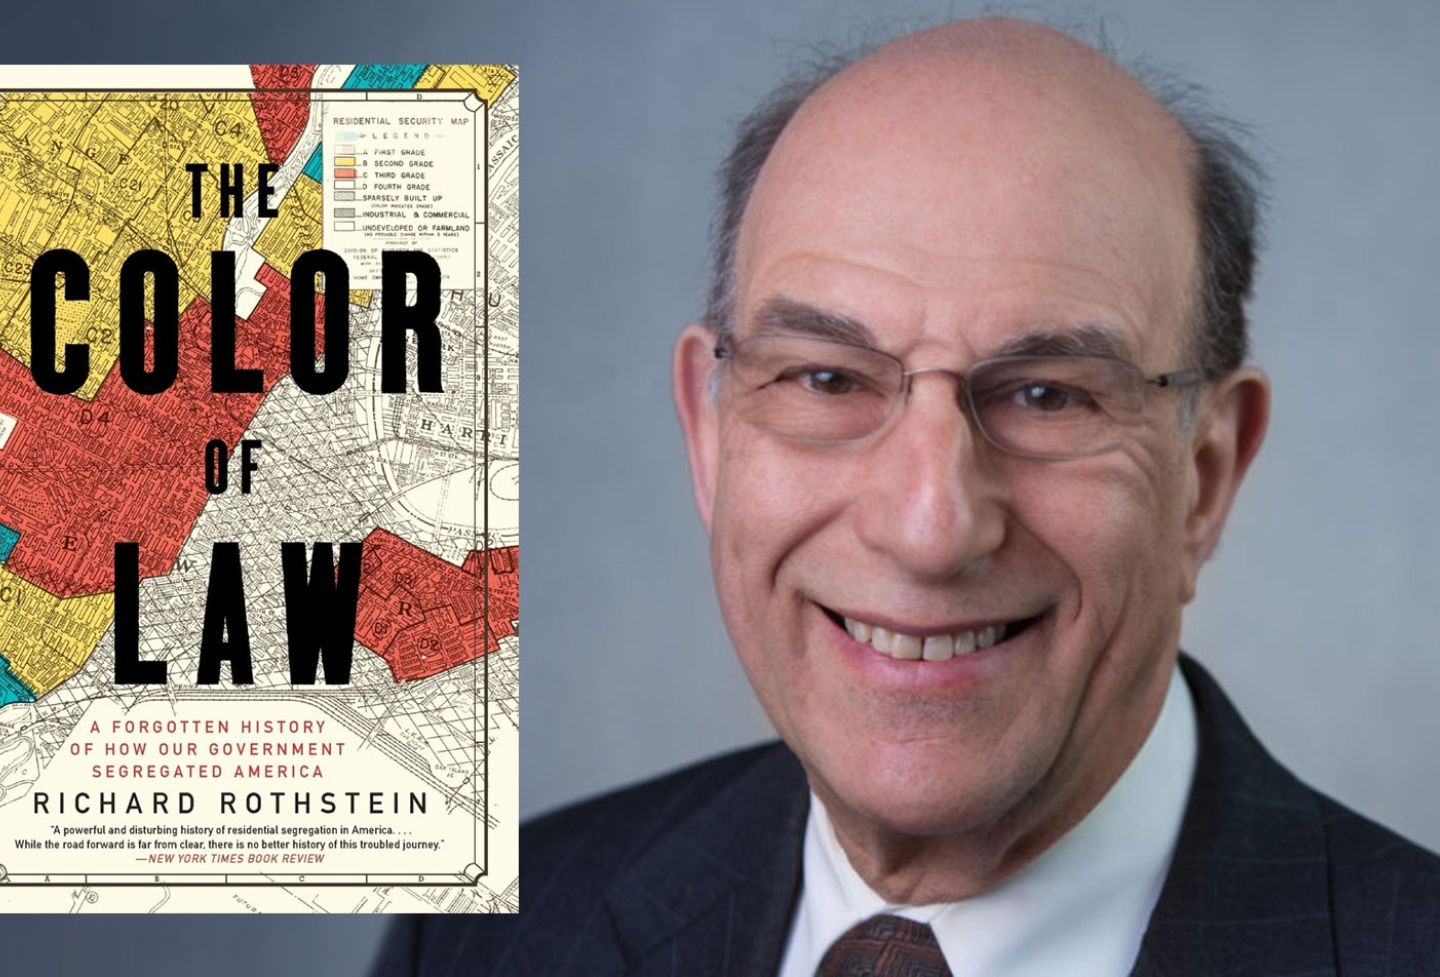 Richard Rothstein and “The Color of Law: A Forgotten History of How Our Government Segregated America”